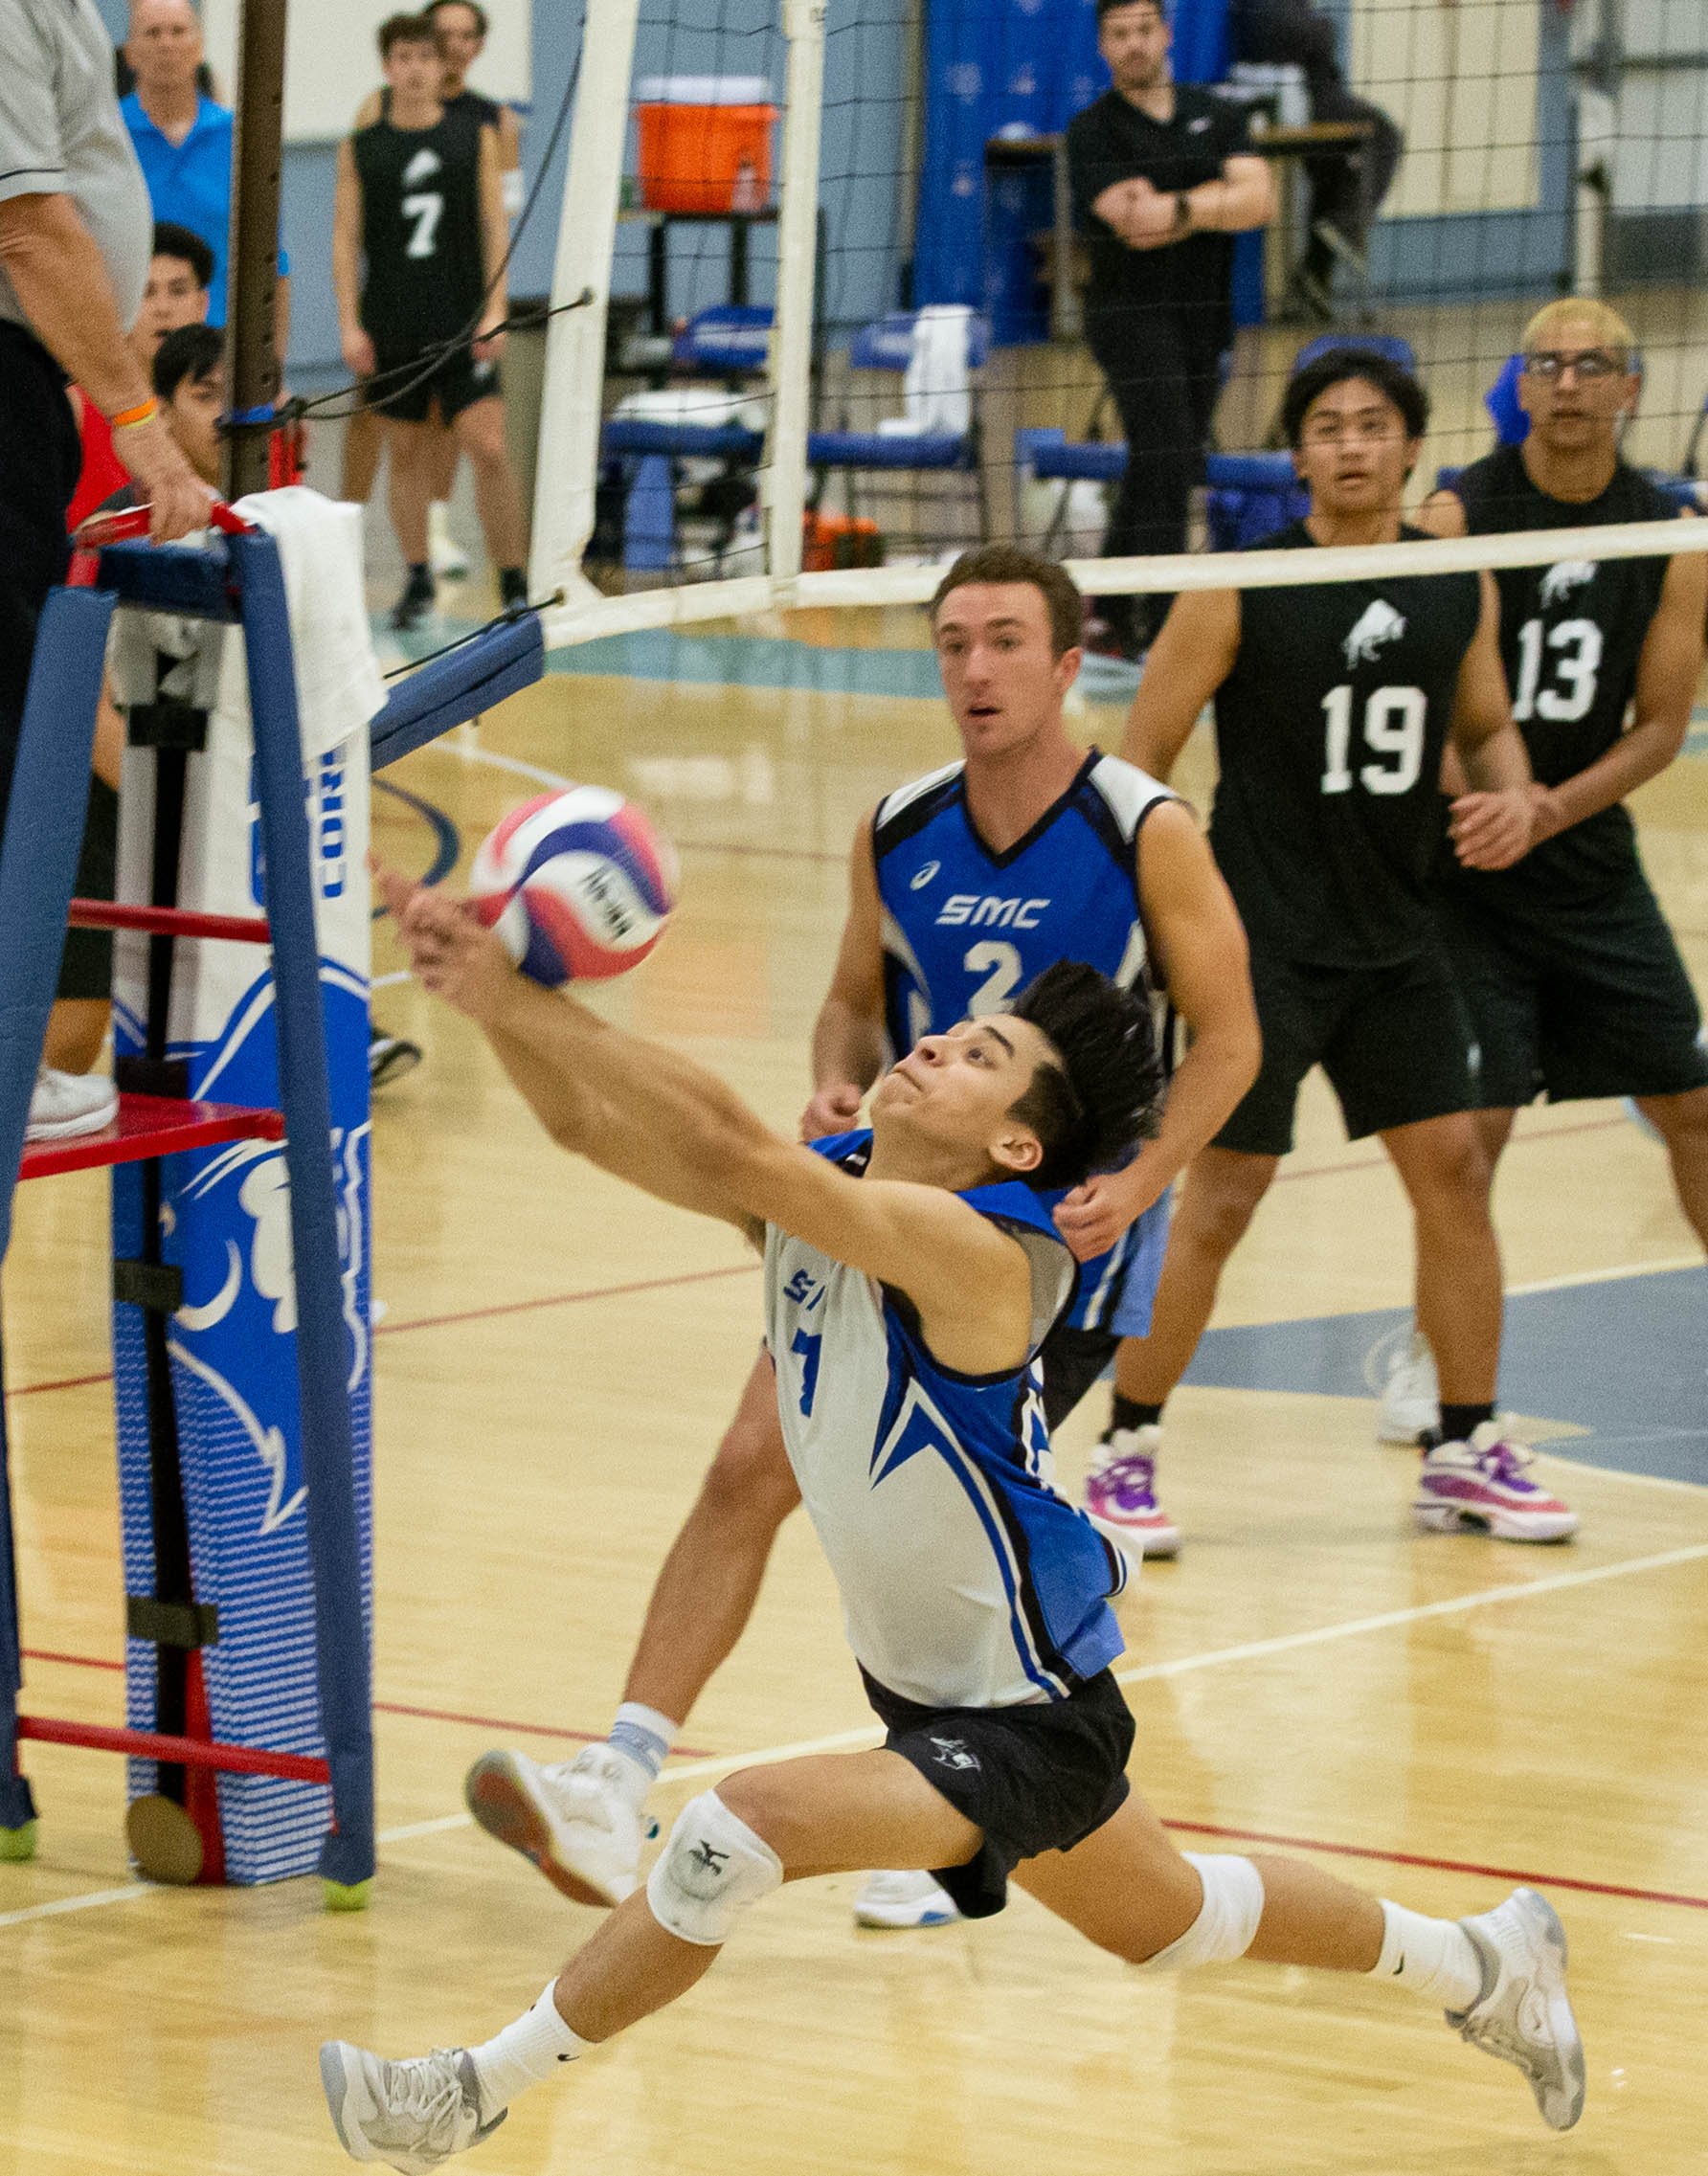  Javier Castillos(7)attempting to save the ball from being out during their match against the L.A. Pierce College Brahma Bulls on Wed. March 15, 2023 in the SMC Pavillion at Santa Monica, Calif. (Danilo Perez | The Corsair) 